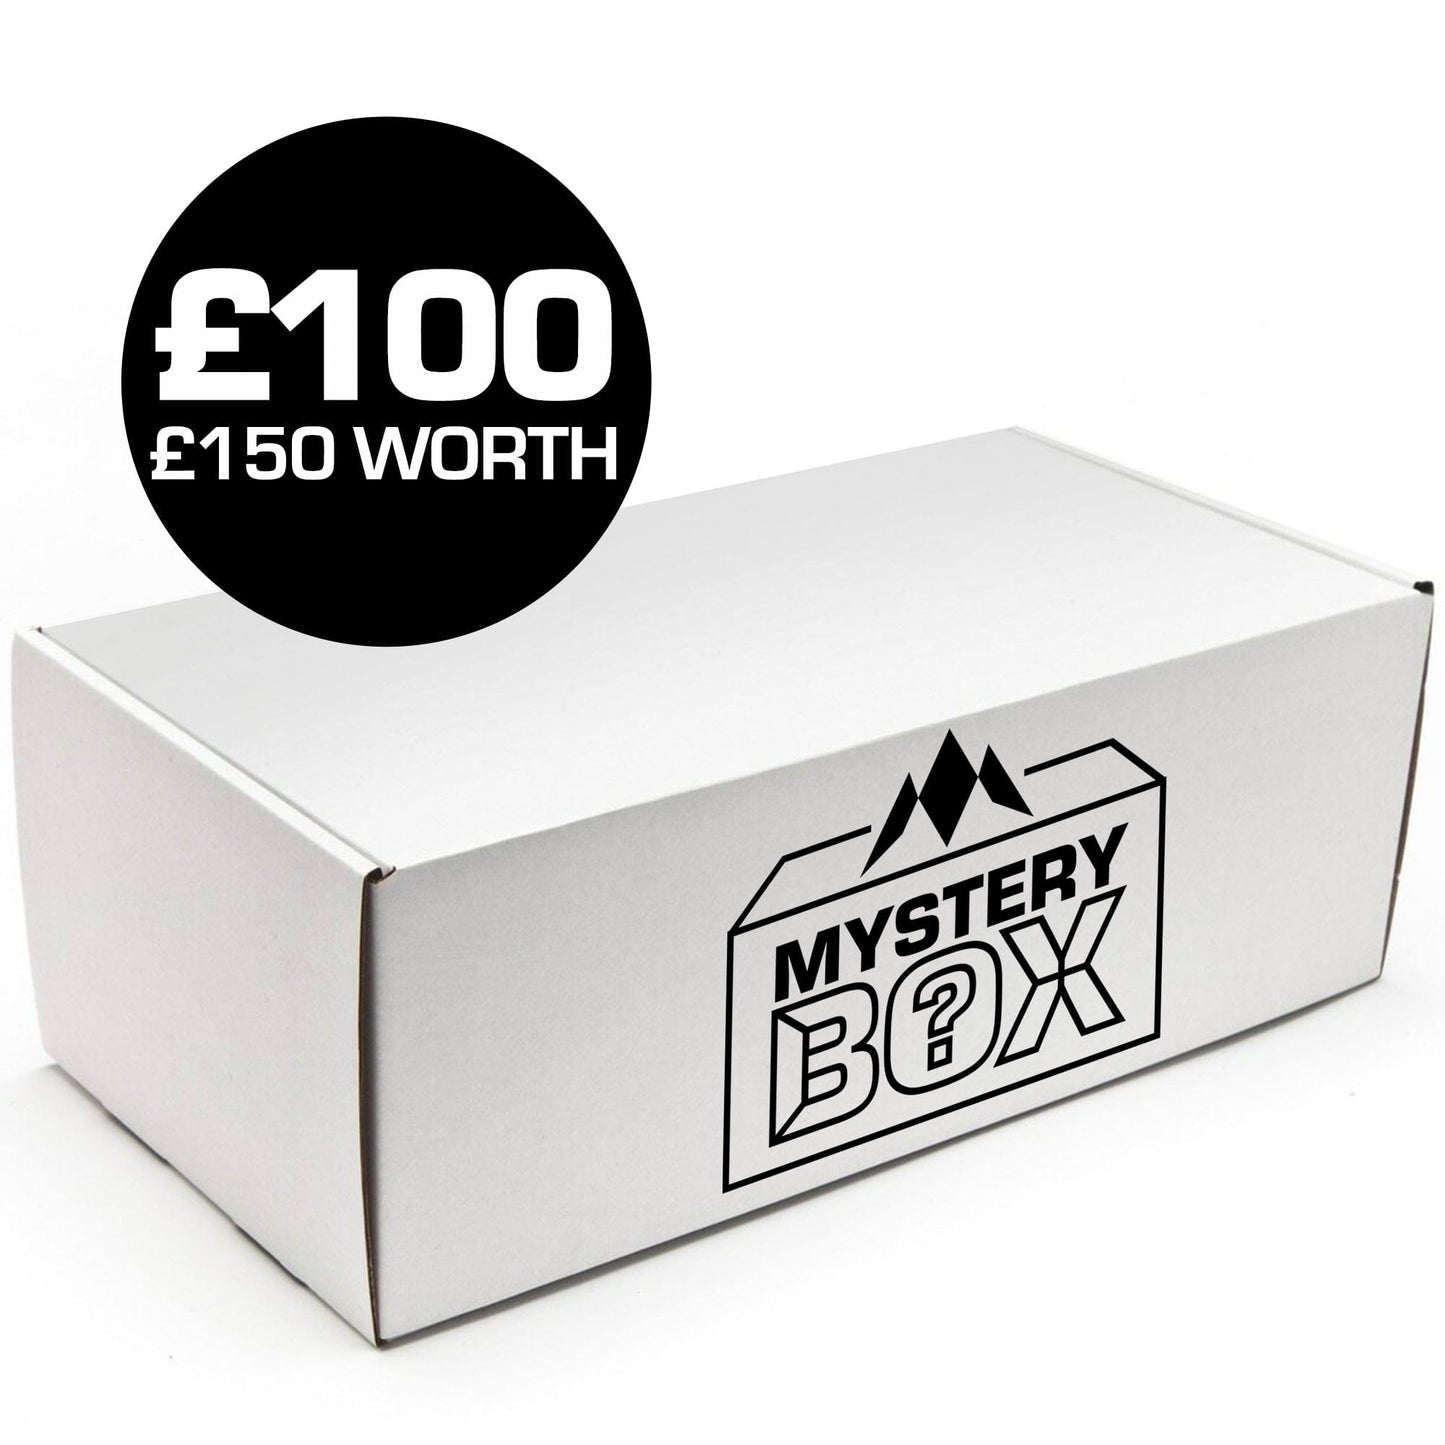 Mission Mystery Box - Steel Tip Darts & Accessories - Worth up to £150